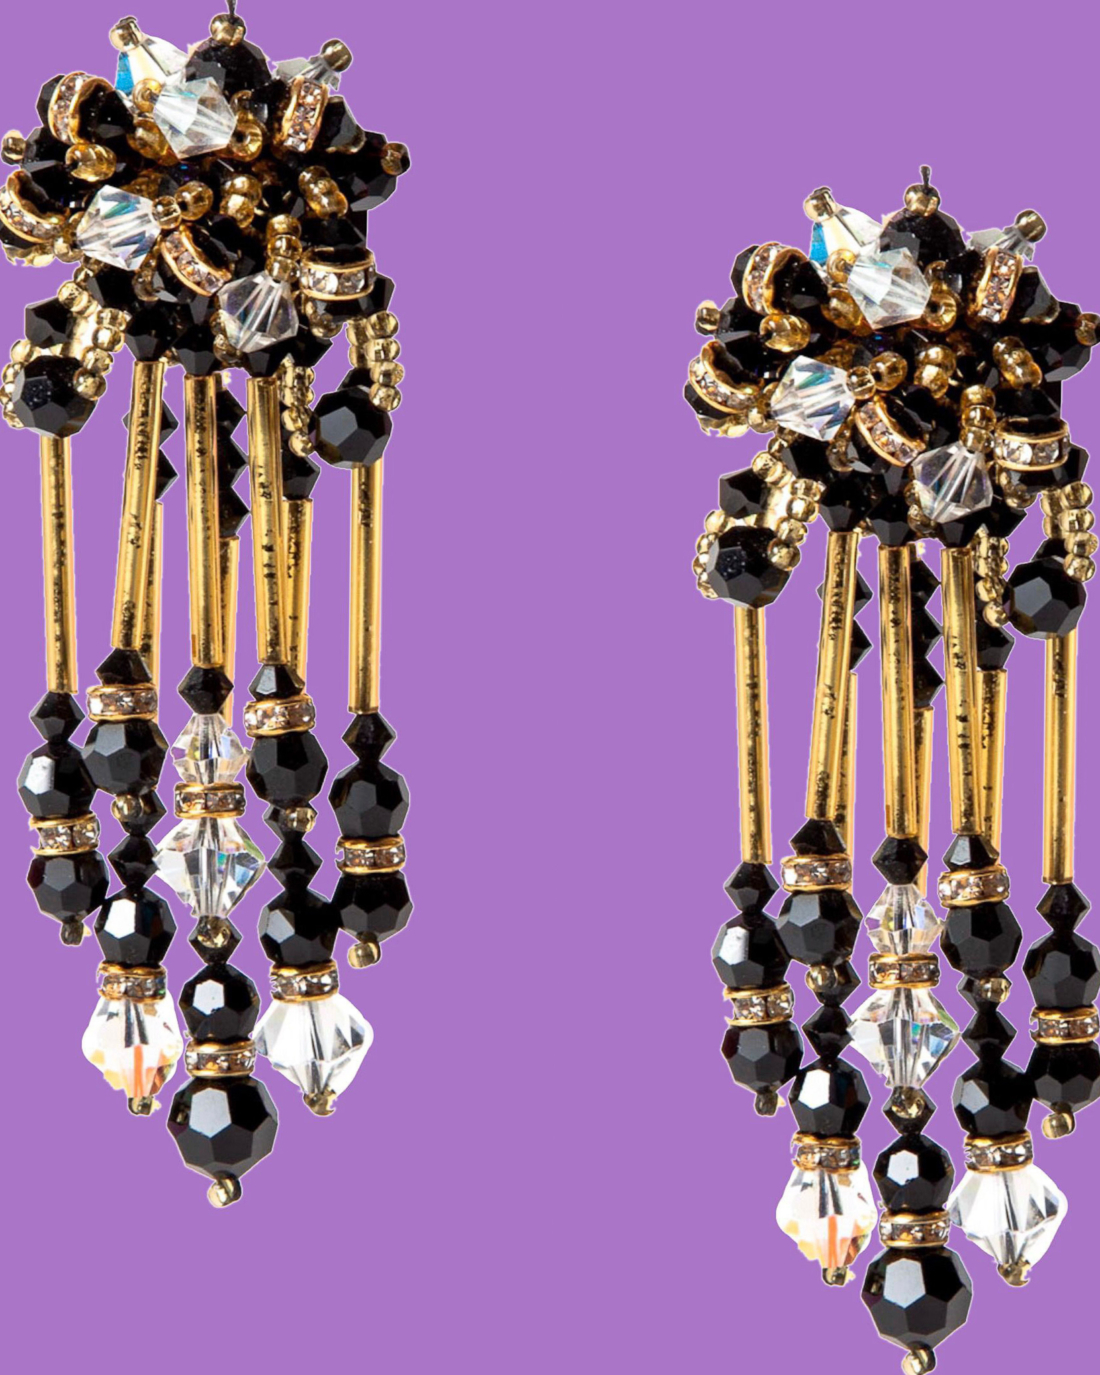 Haute Couture Hand Beaded Black Gold and Crystal Earrings, Made in Italy, circa 1960’s